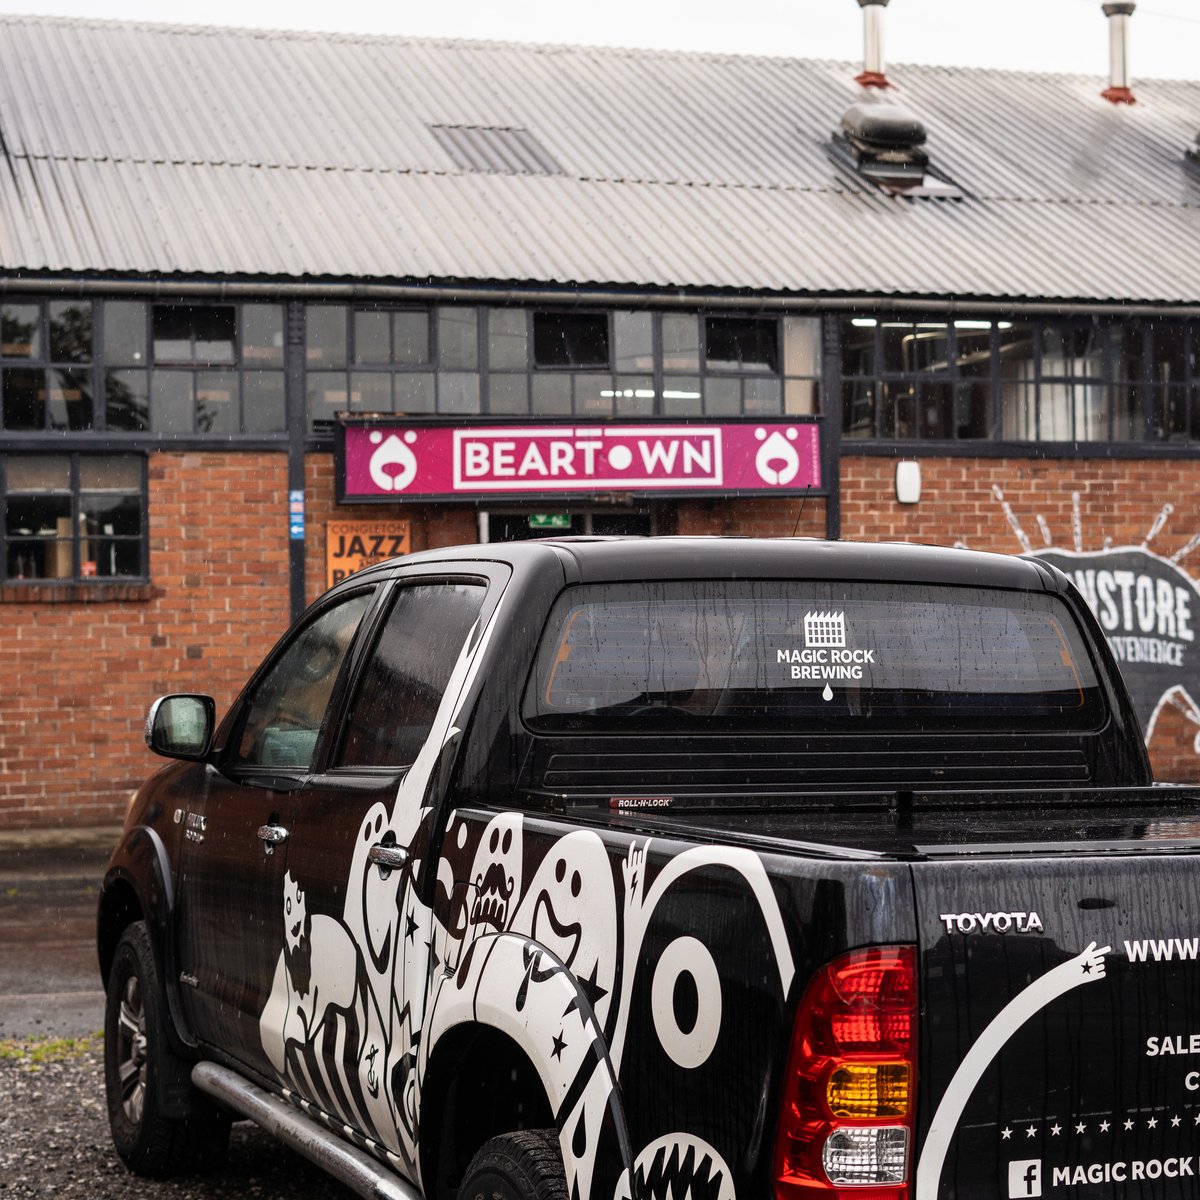 👀 A Magic Rock Brewing truck parked outside Beartown Brewery. They must be coming over for a catch up and a brew 🫖 Or... surely not 🤔 #craftbeer #beartown #brew #magicrock #cheshire #yorkshire